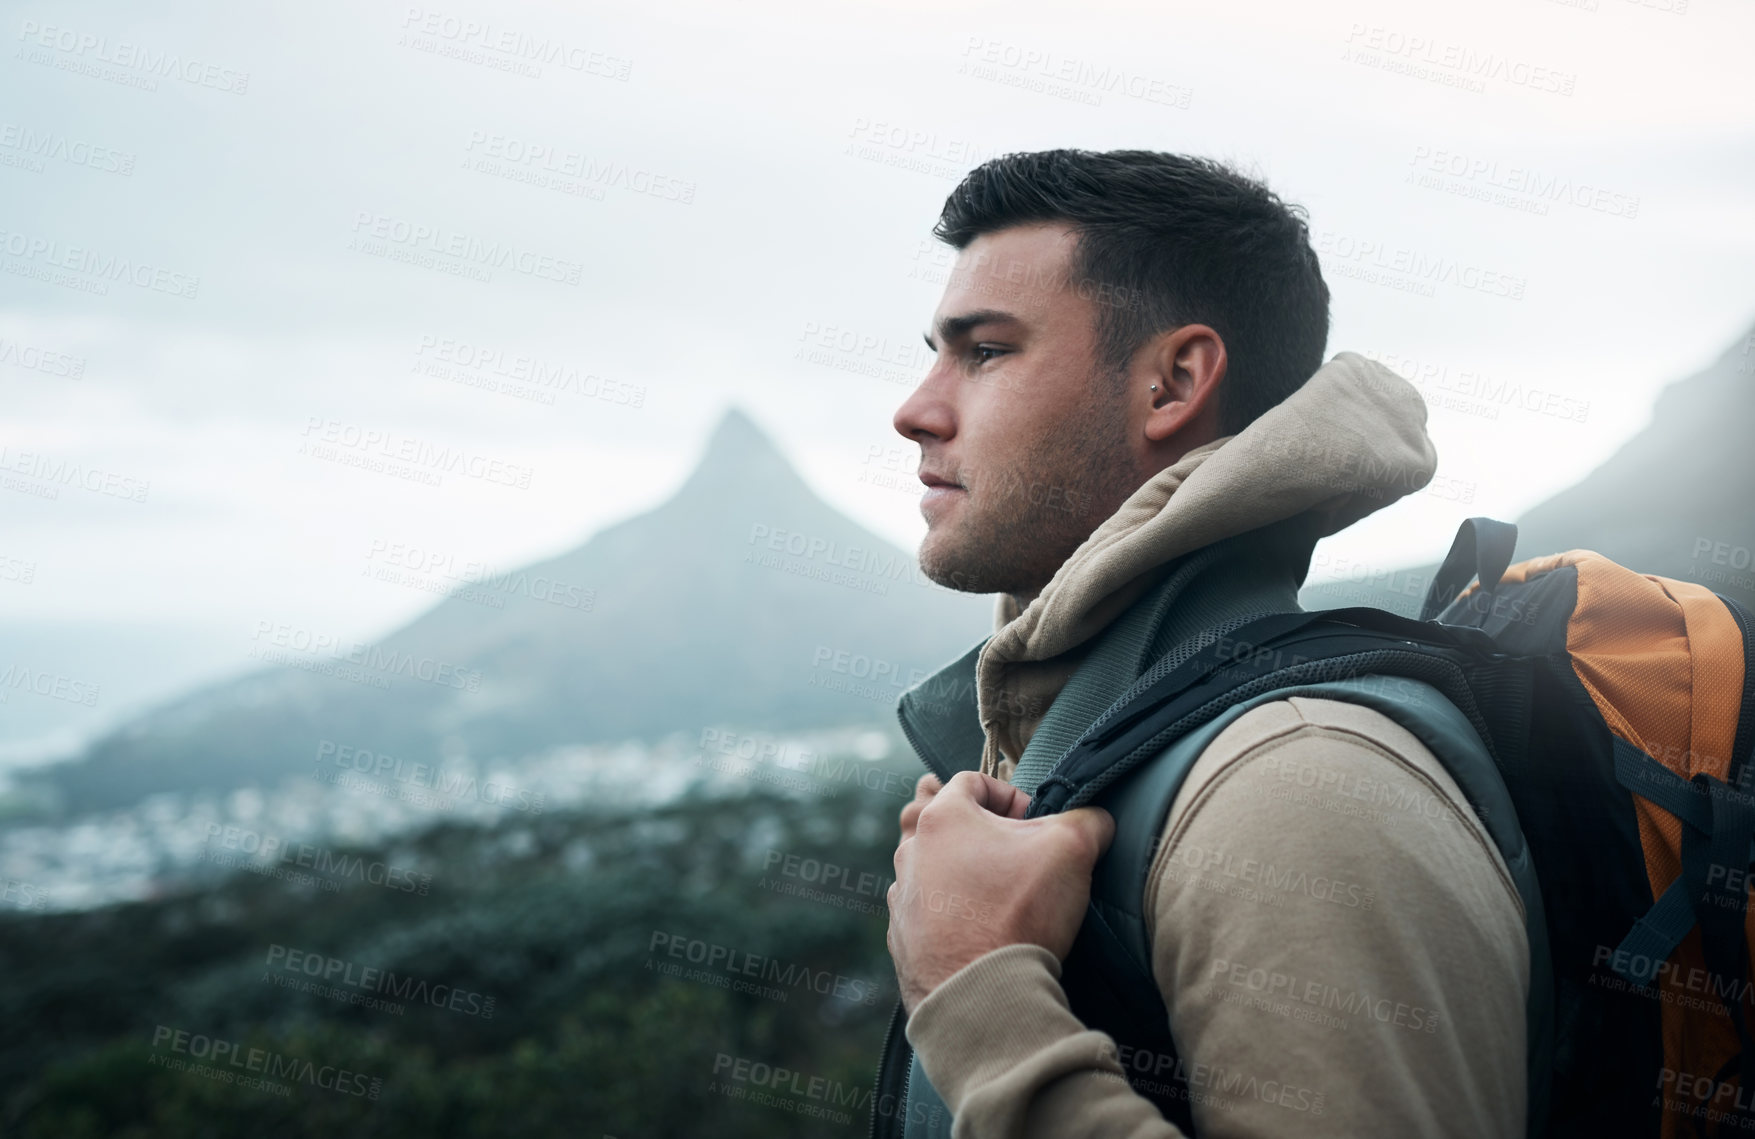 Buy stock photo Shot of a young man hiking through the mountains